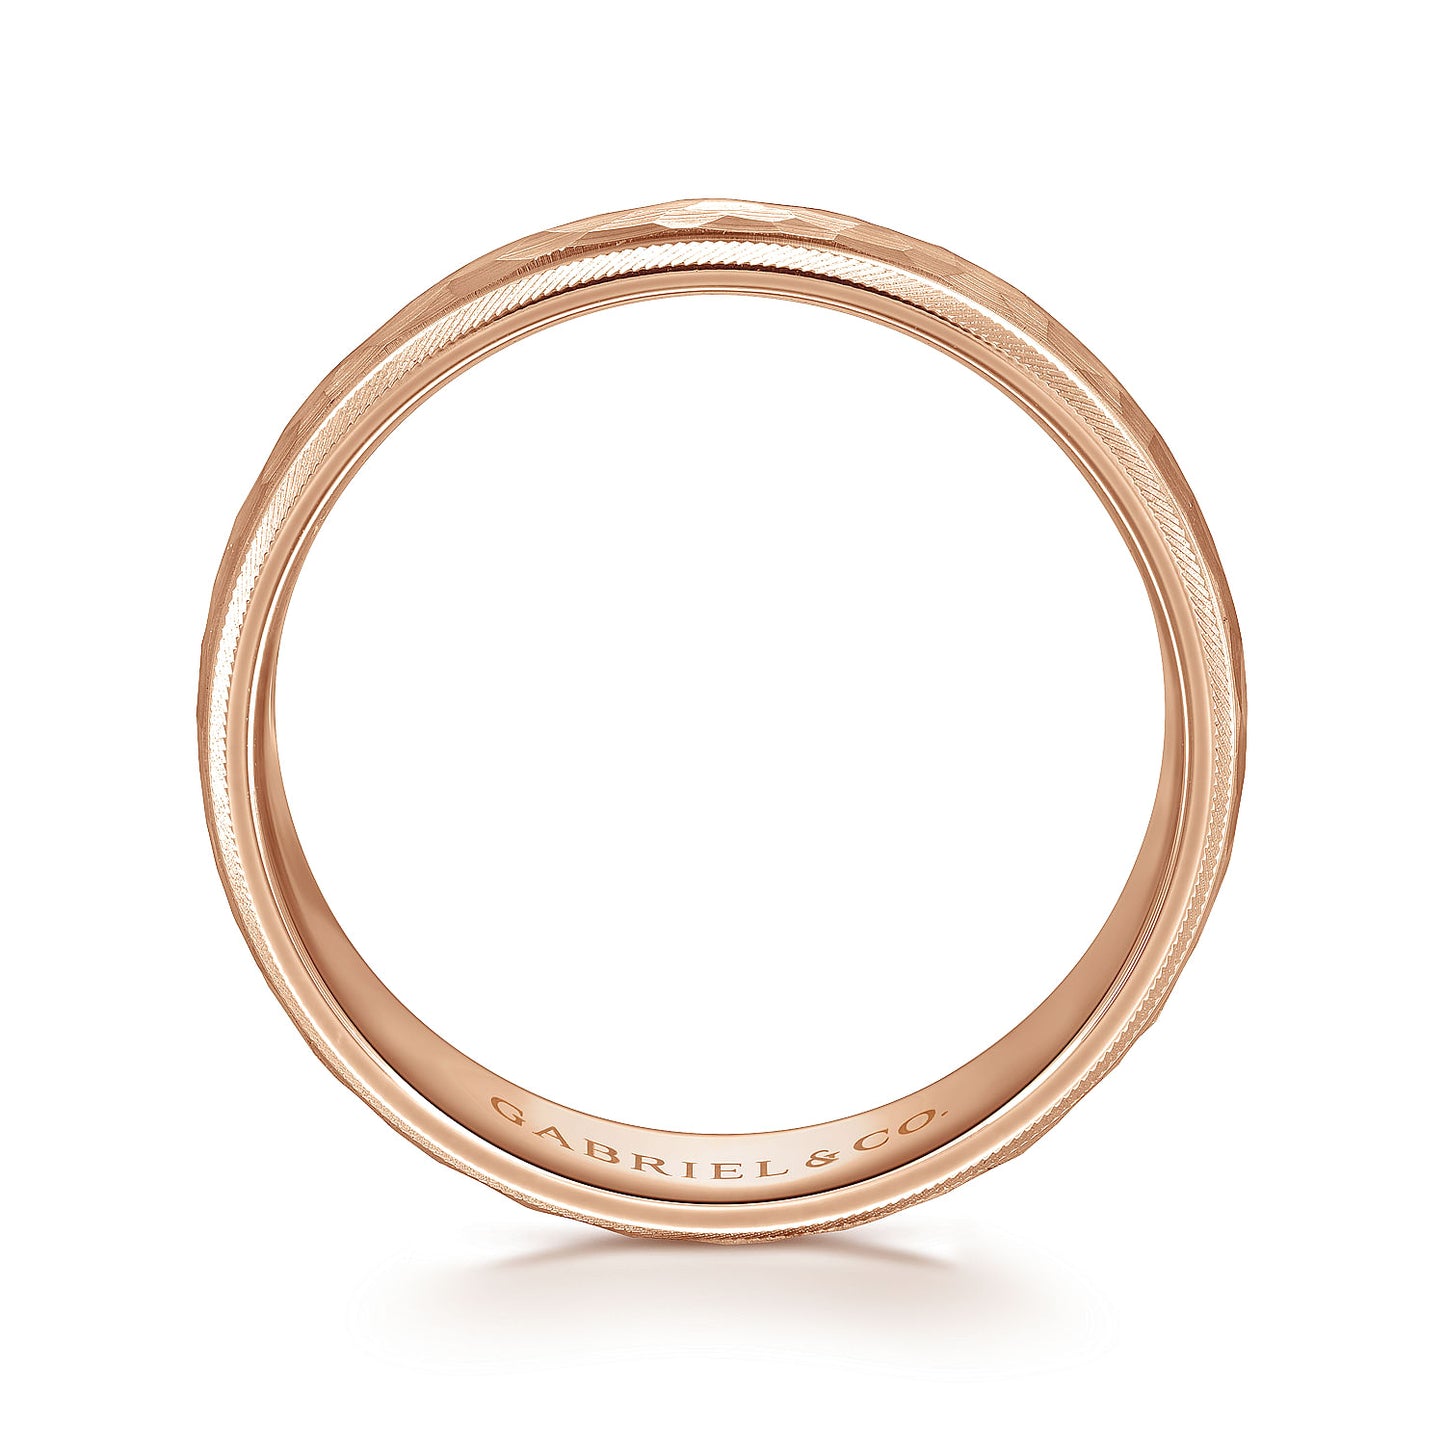 Gabriel & Co Rose Gold Wedding Band With A Hammered Finished Center And A Diamond Cut Edge - Gold Wedding Bands - Men's